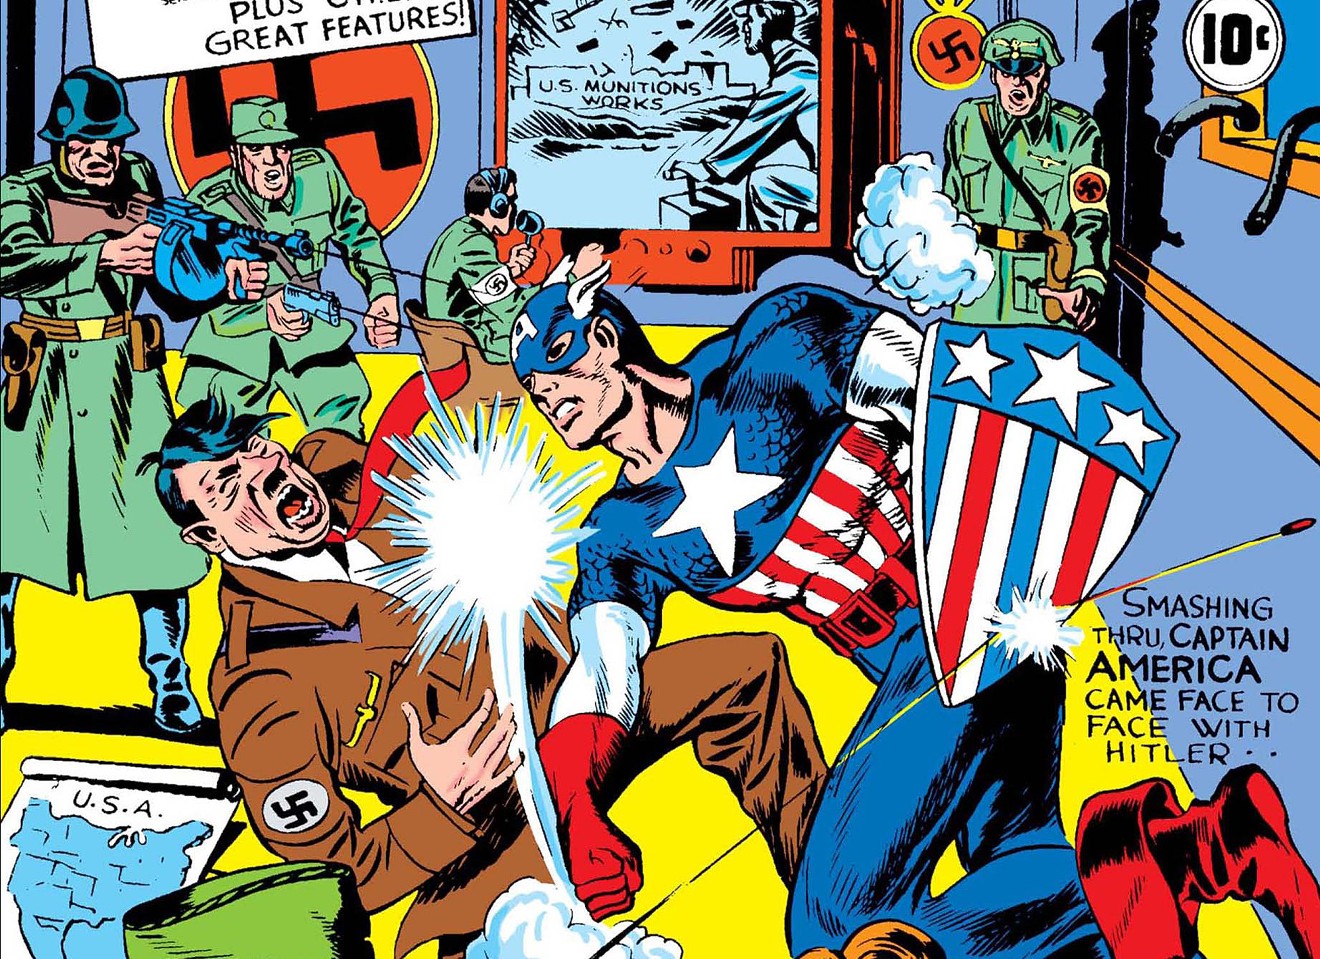 In 1941, Captain America was socking it to Hitler months before the U.S. entered World War II. Co-creators Joe Simon and Jack Kirby spent decades fighting unsuccessfully for ownership rights to the All-American hero.